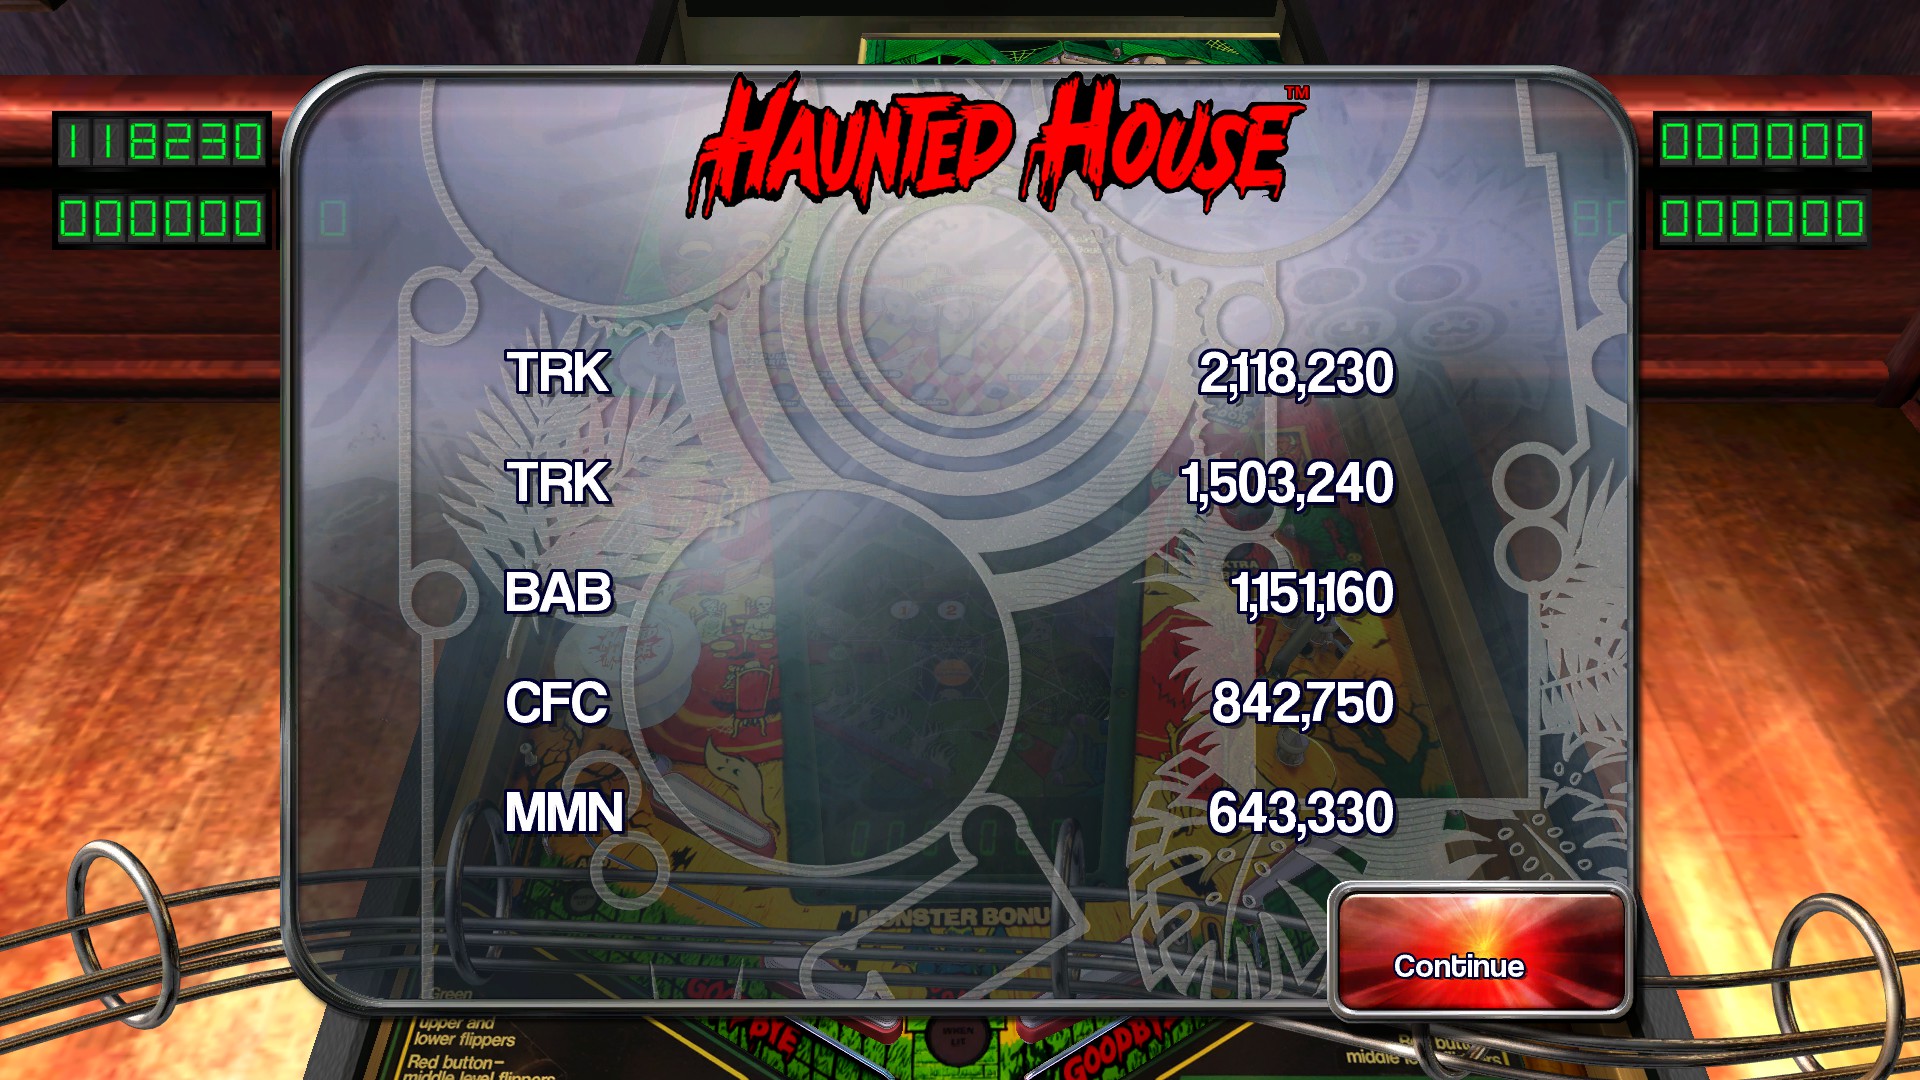 TheTrickster: Pinball Arcade: Haunted House (PC) 2,118,230 points on 2016-02-17 05:21:24